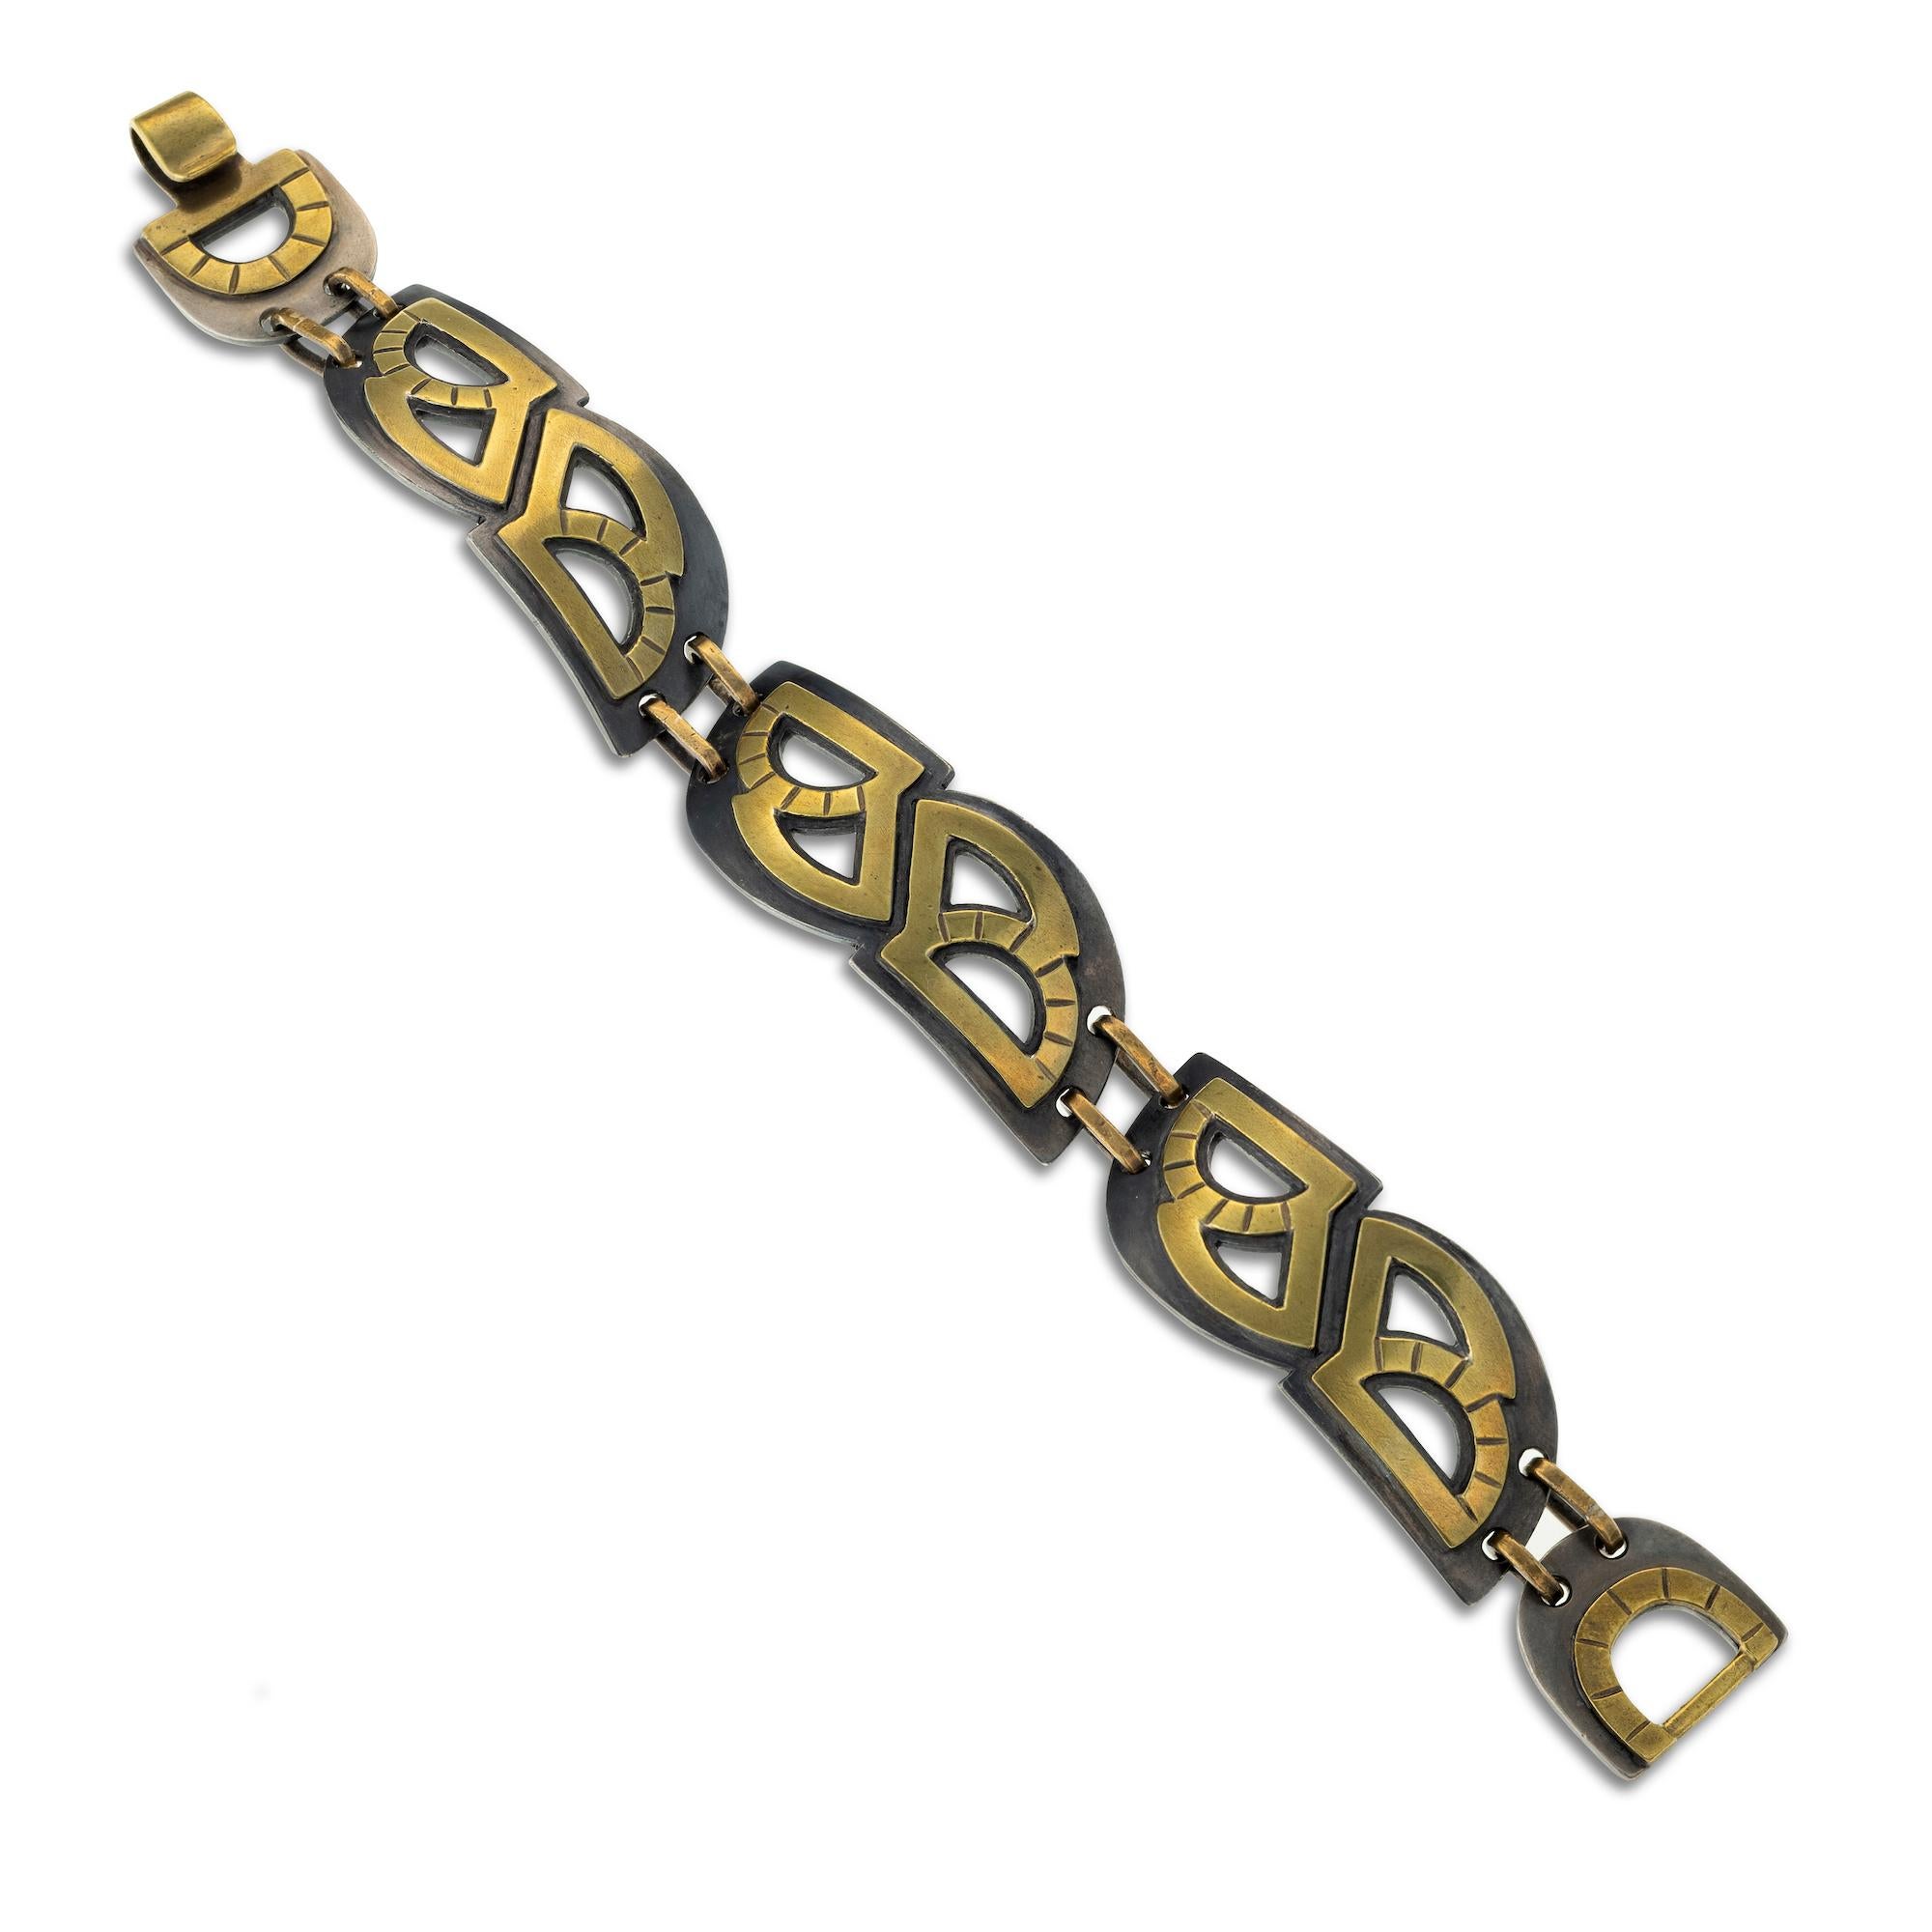 Oxidized sterling and brass make up the contrasting and rhythmic pattern of shapes in this sturdy and sophisticated link bracelet. 8.5